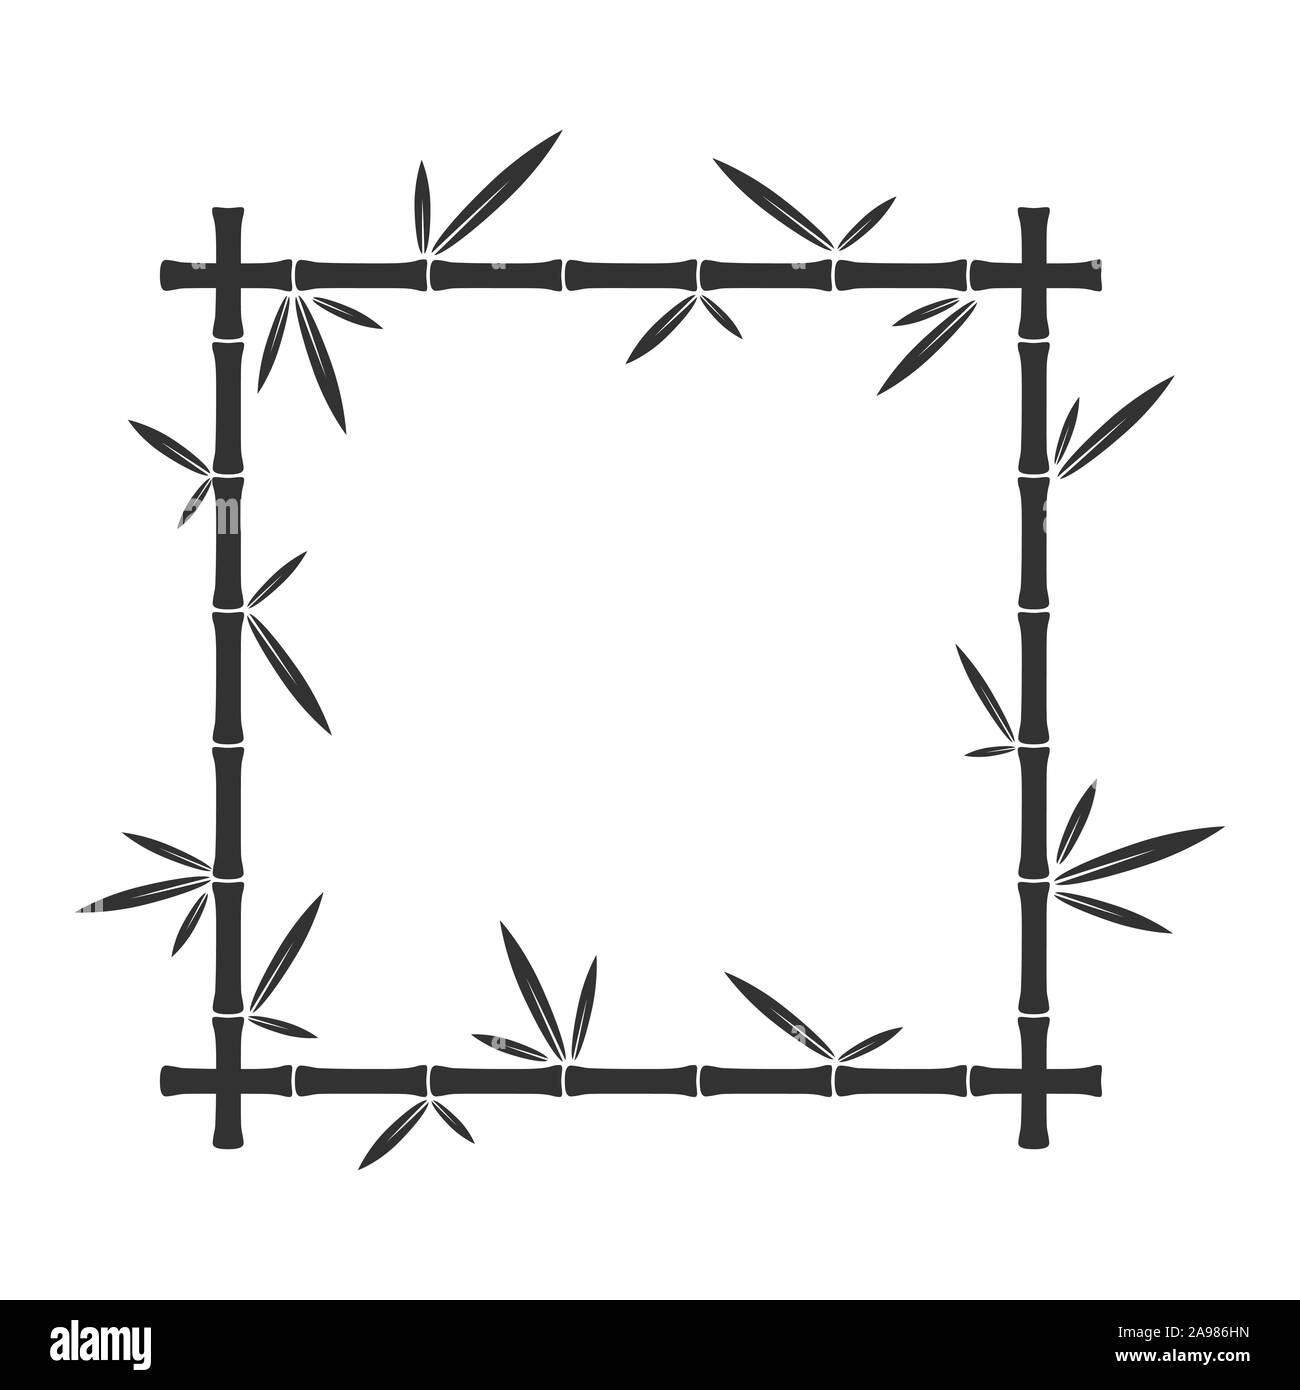 Vector bamboo square frame. Bamboo stalks and leaves. Black design element isolated. Stock Vector